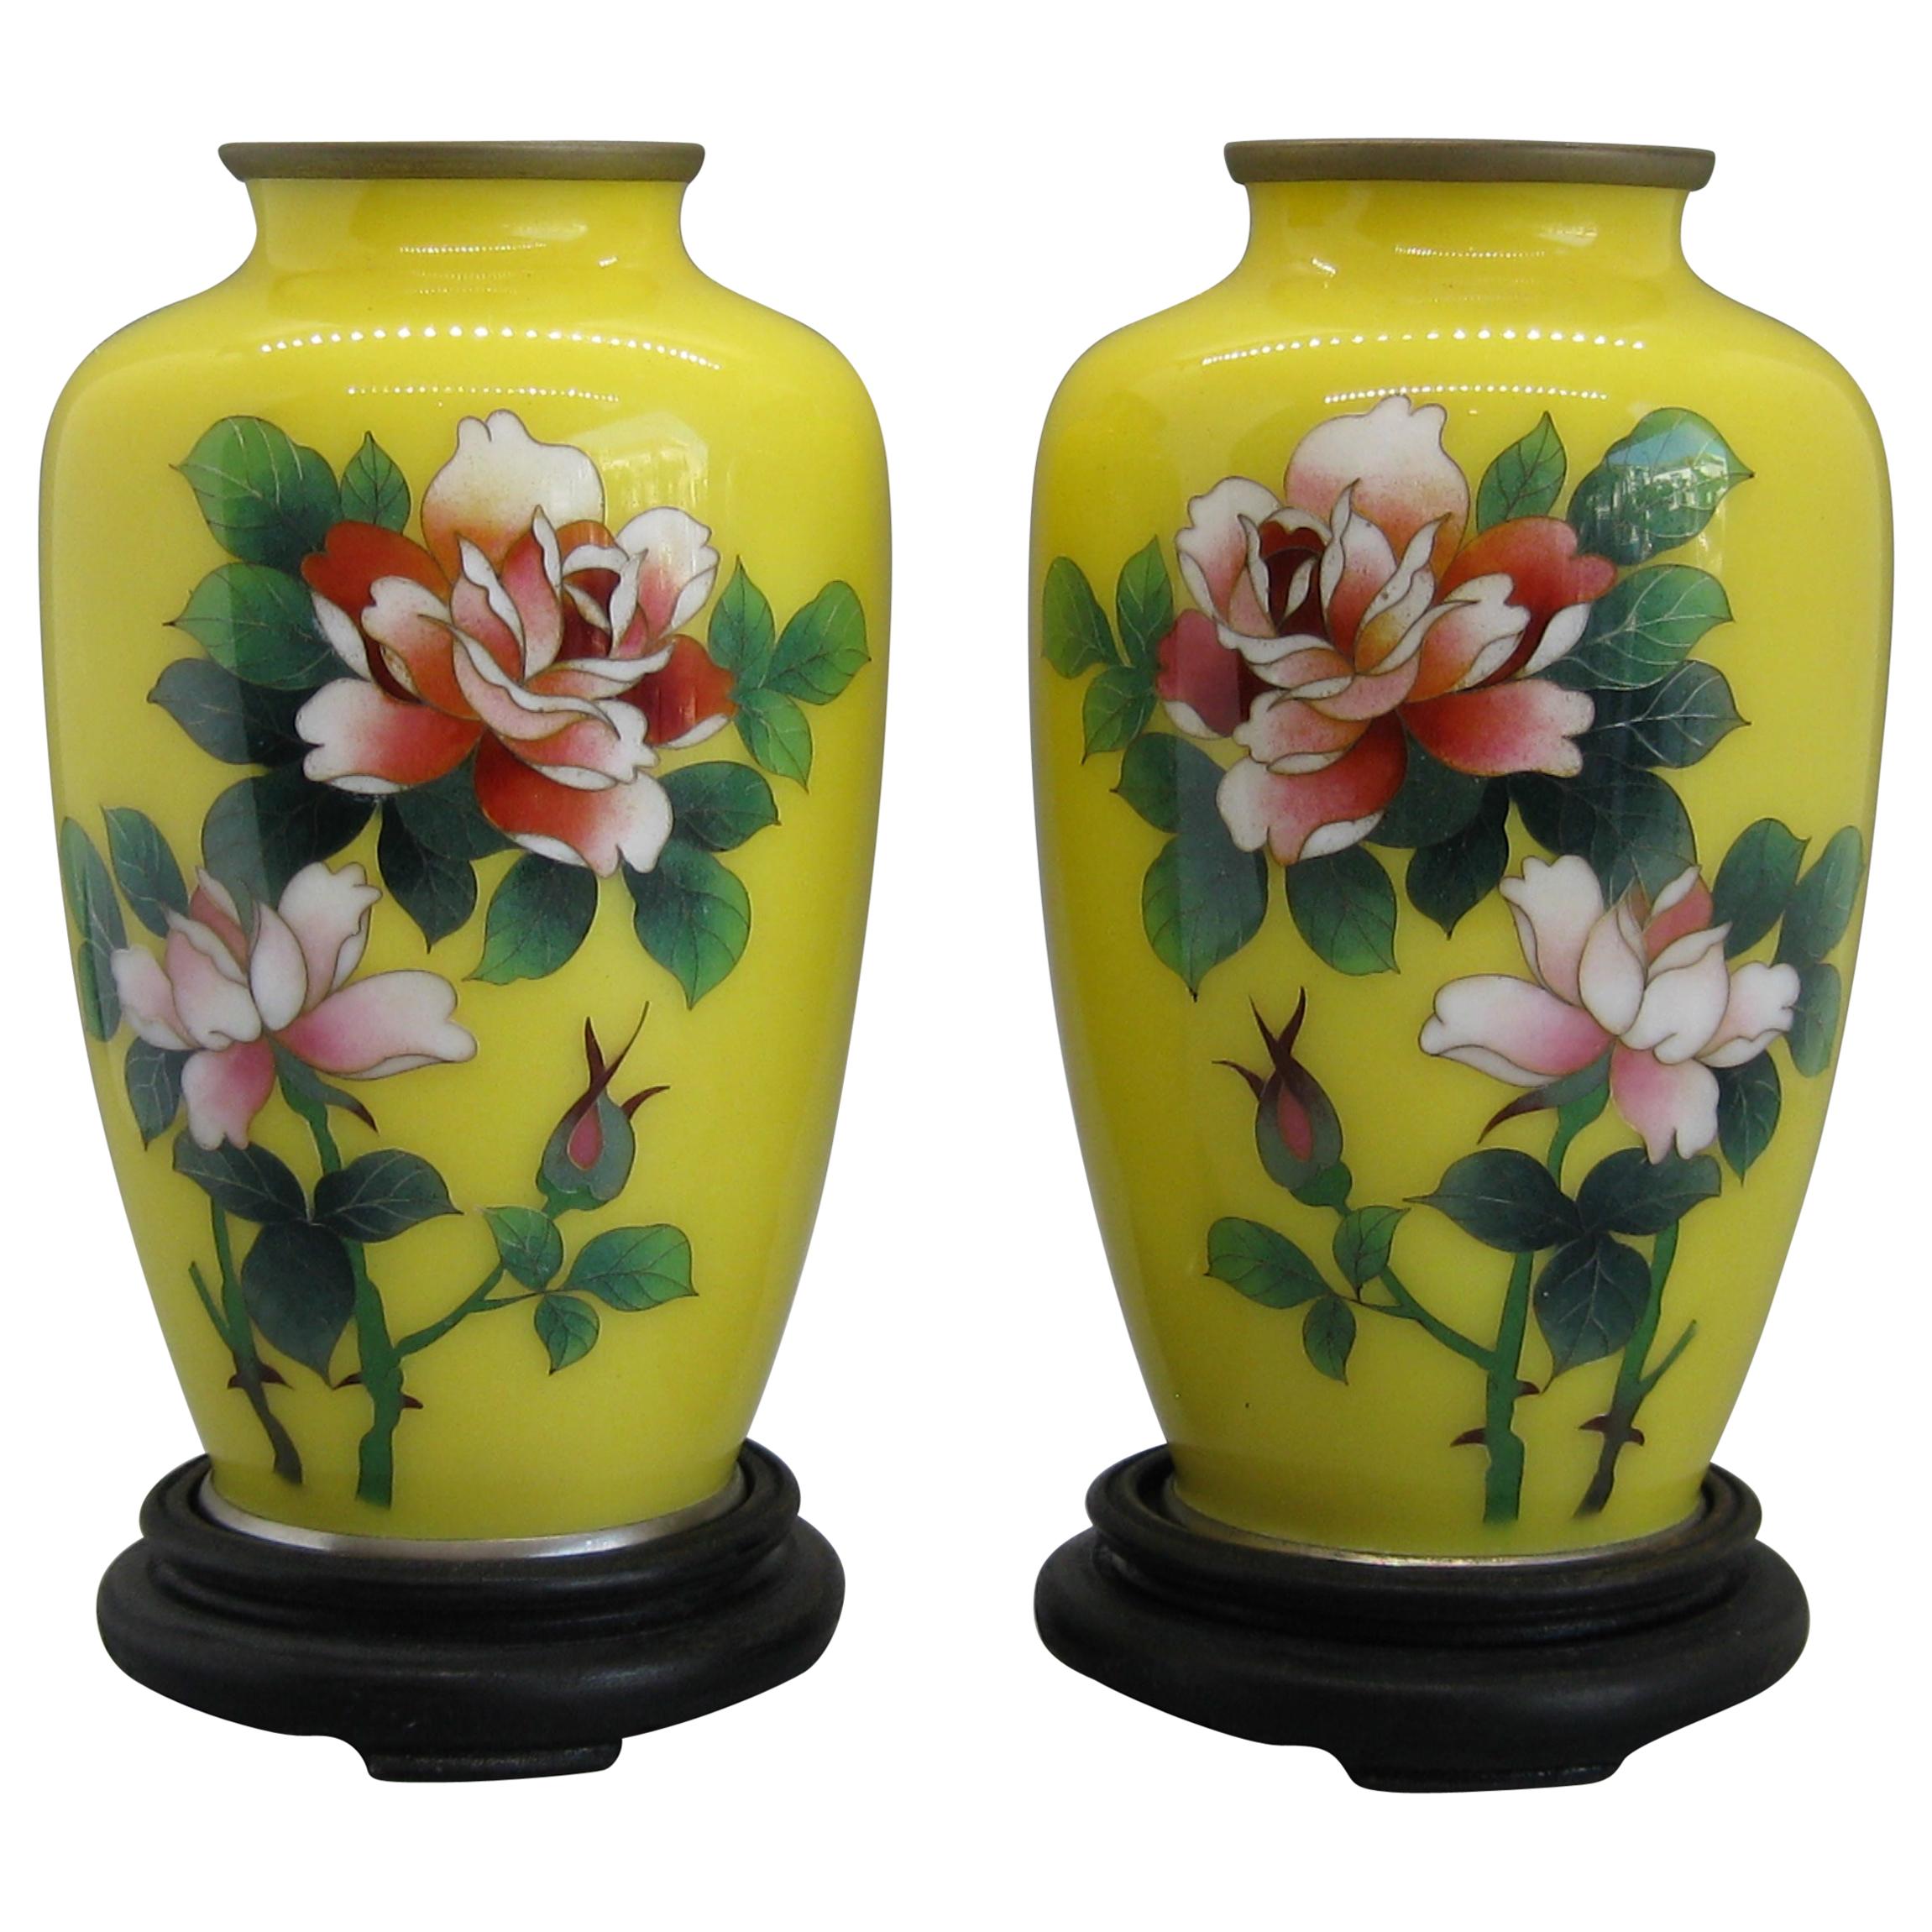 Fine Pair of Antique Japanese Cloisonné Enamel Vase Attributed to Ando Jubei